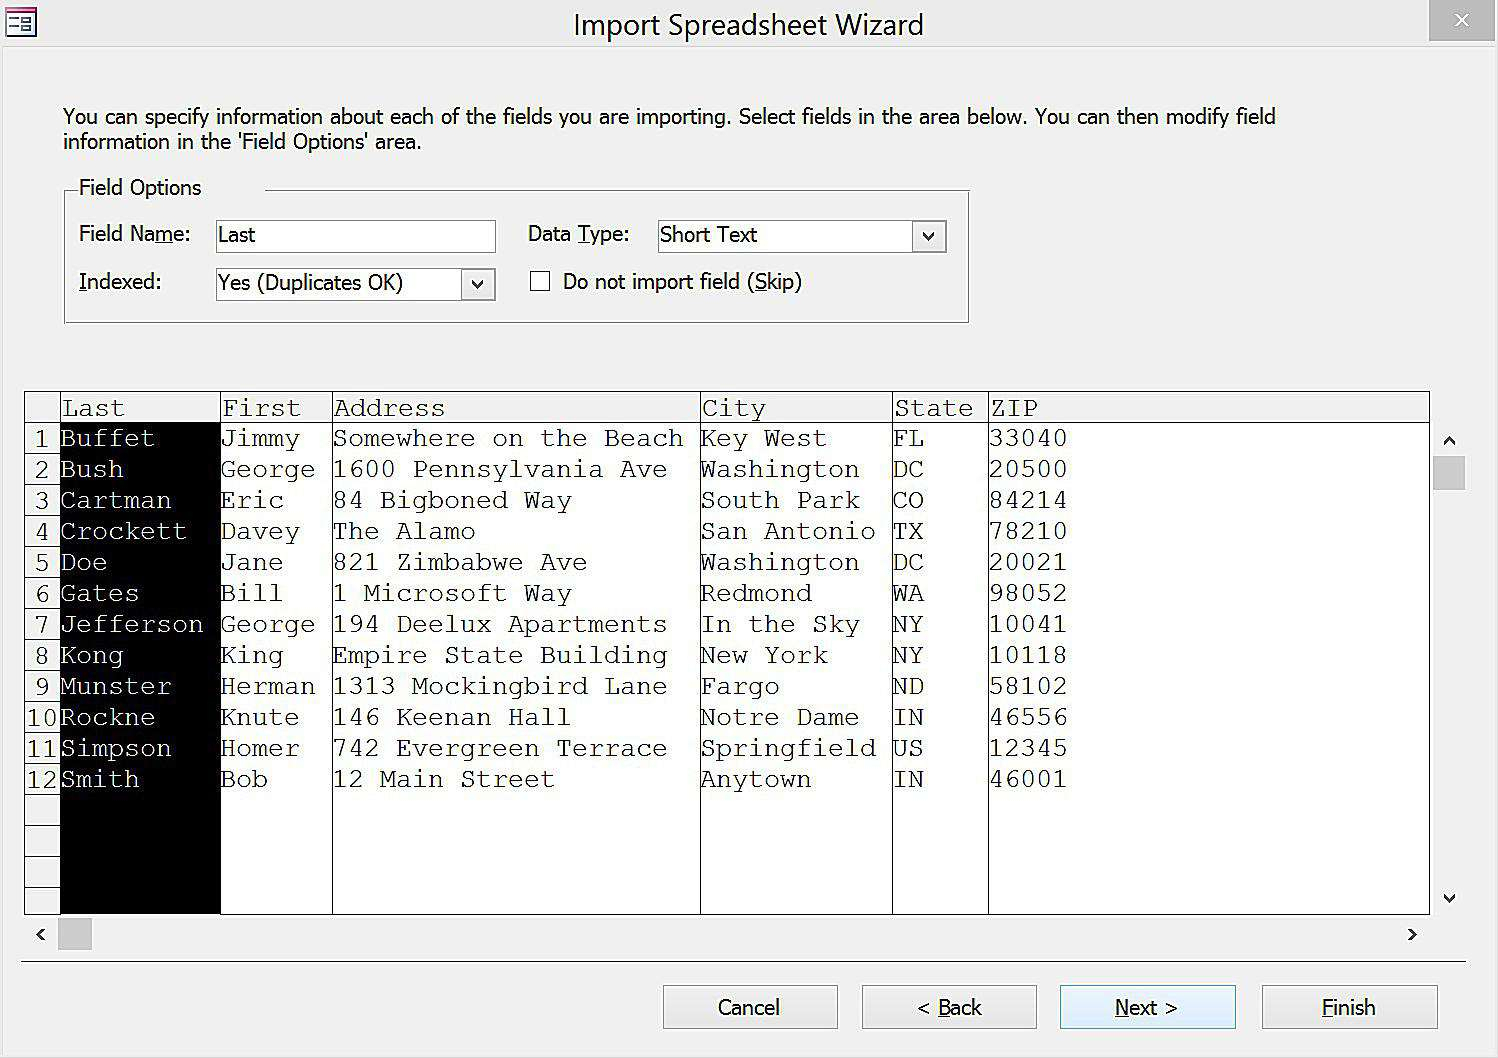 Convert Excel Spreadsheet To Access Database 2013 For Converting An Excel Spreadsheet To Access 2013 Database